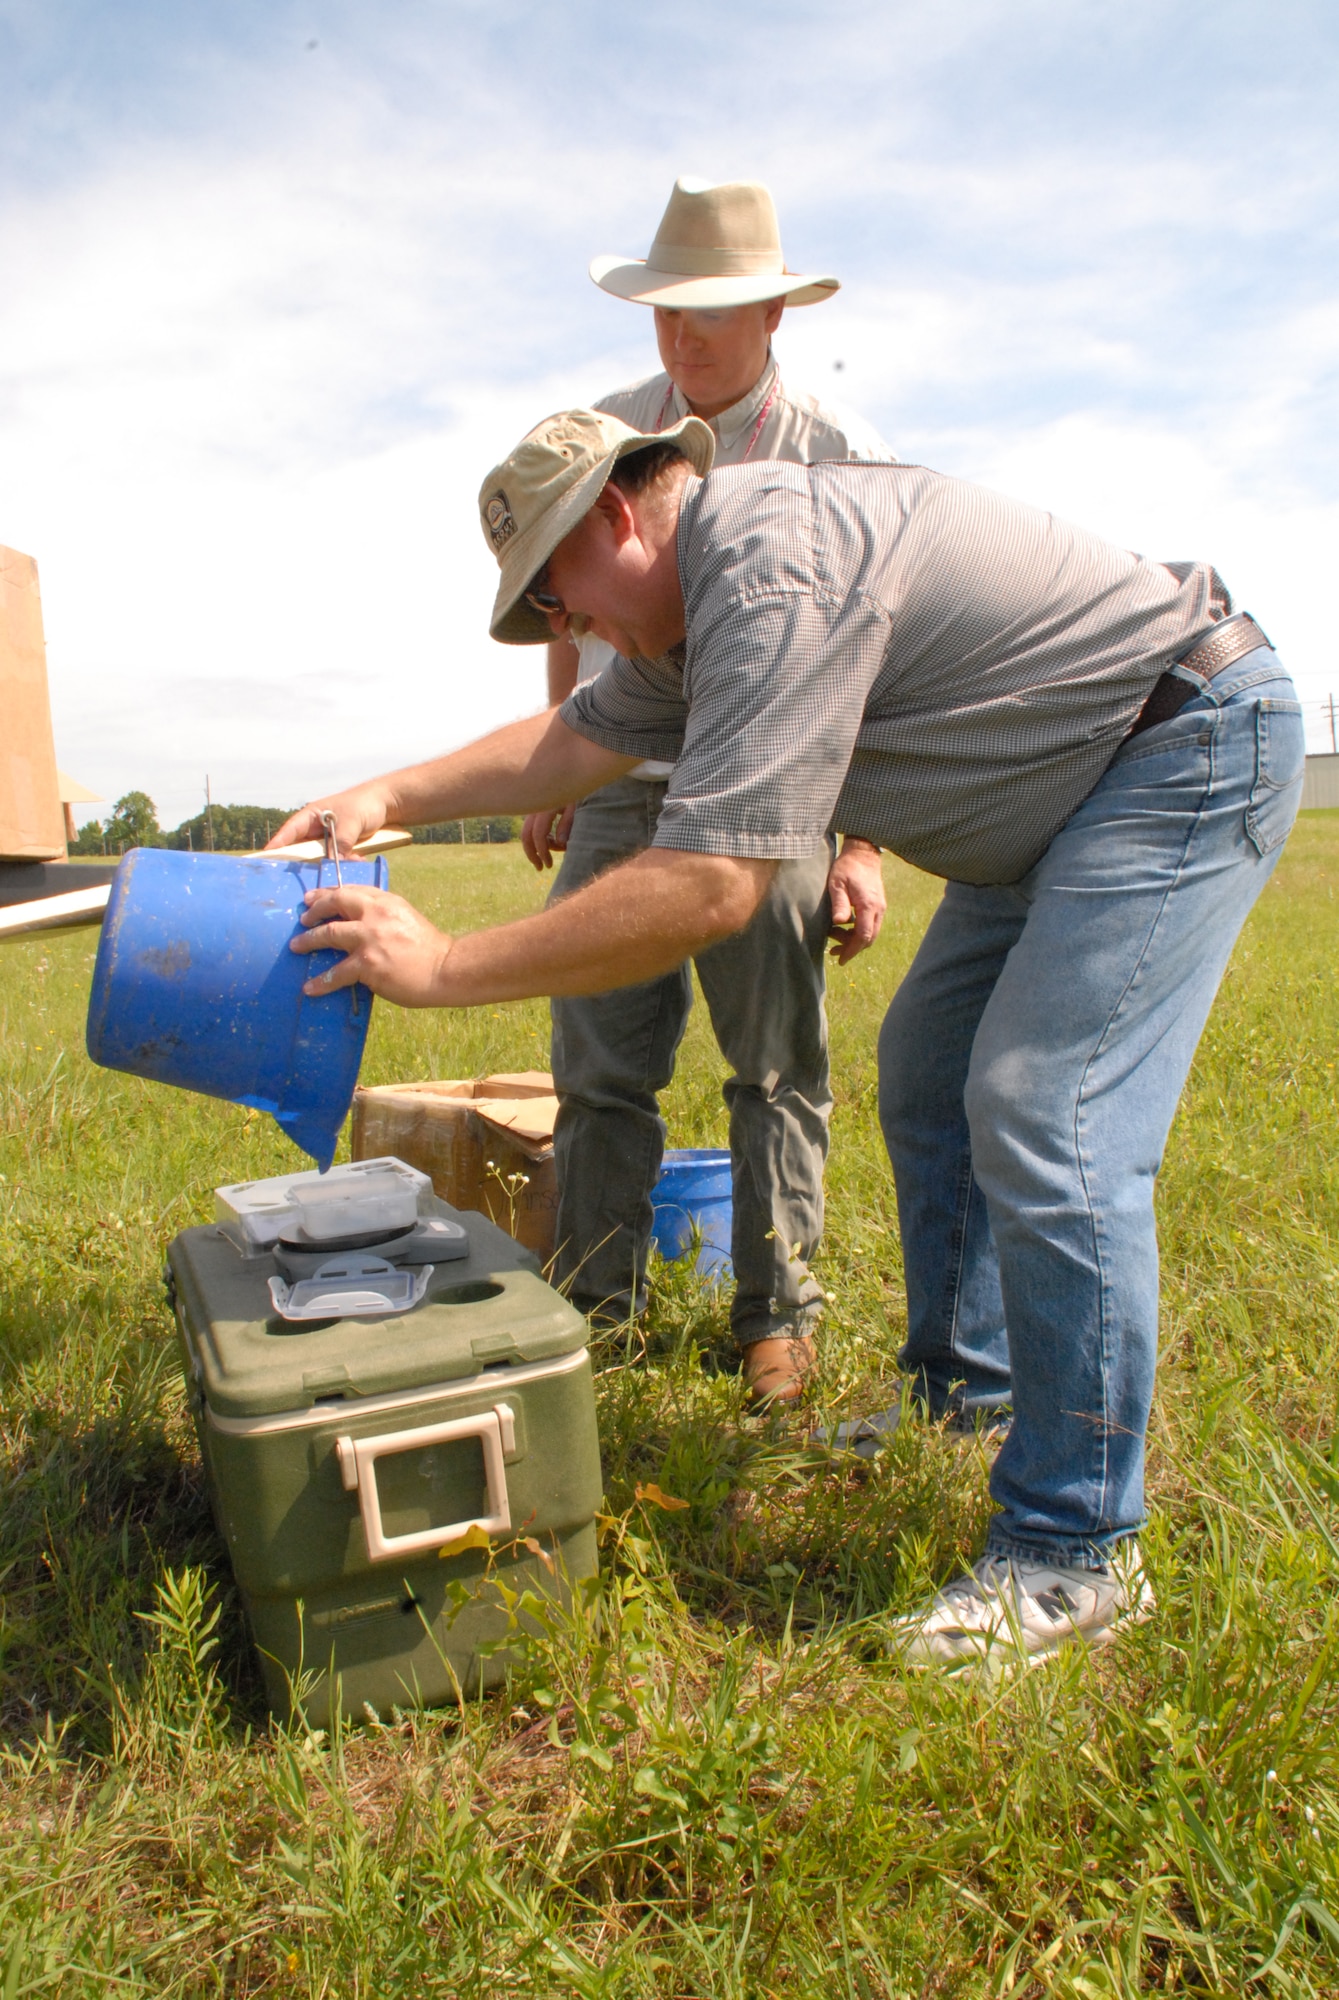 Dr. Kelly Loftin (background) and Dr. John Hopkins of the University of Arkansas Division of Agriculture collect red imported fire ants on base June 7 as part of a bi-annual study to control the non-native fire ant population. (U.S. Air Force photo by Capt. Joe Knable)